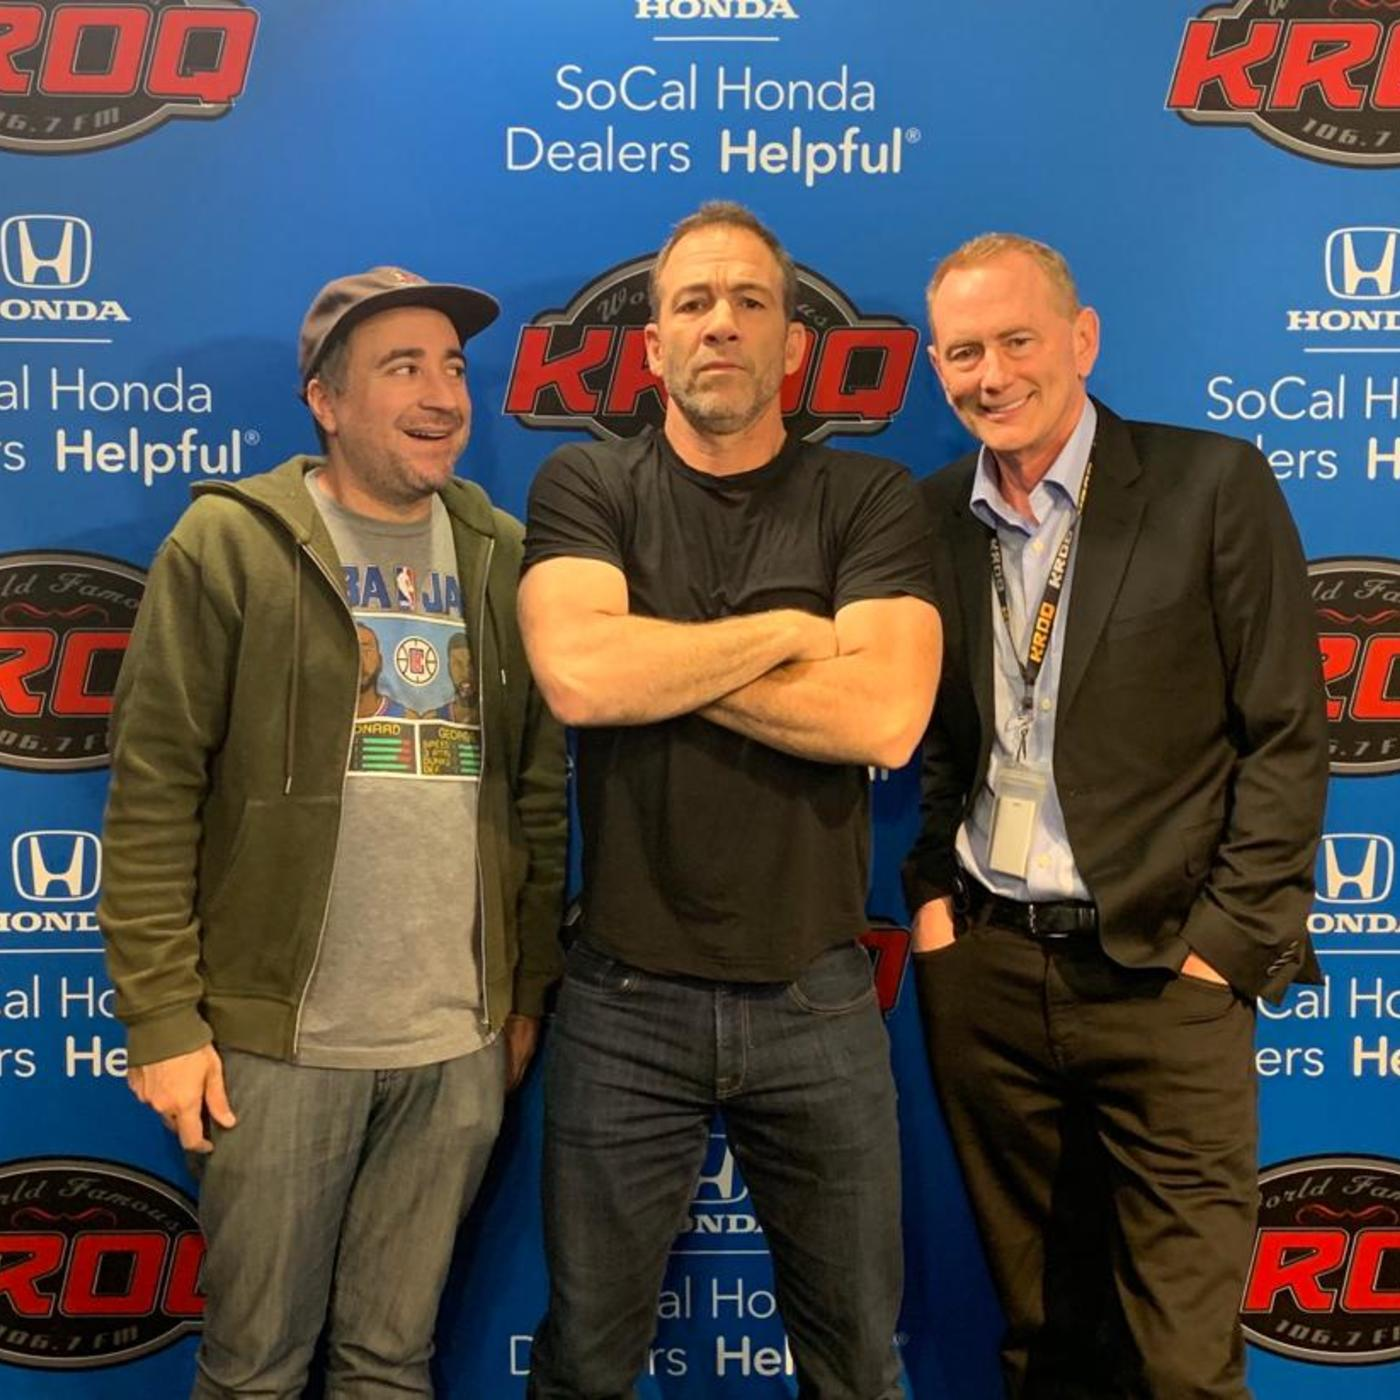 K&B Best Of Podcast: Monday, December 16th with guest: Bryan Callen